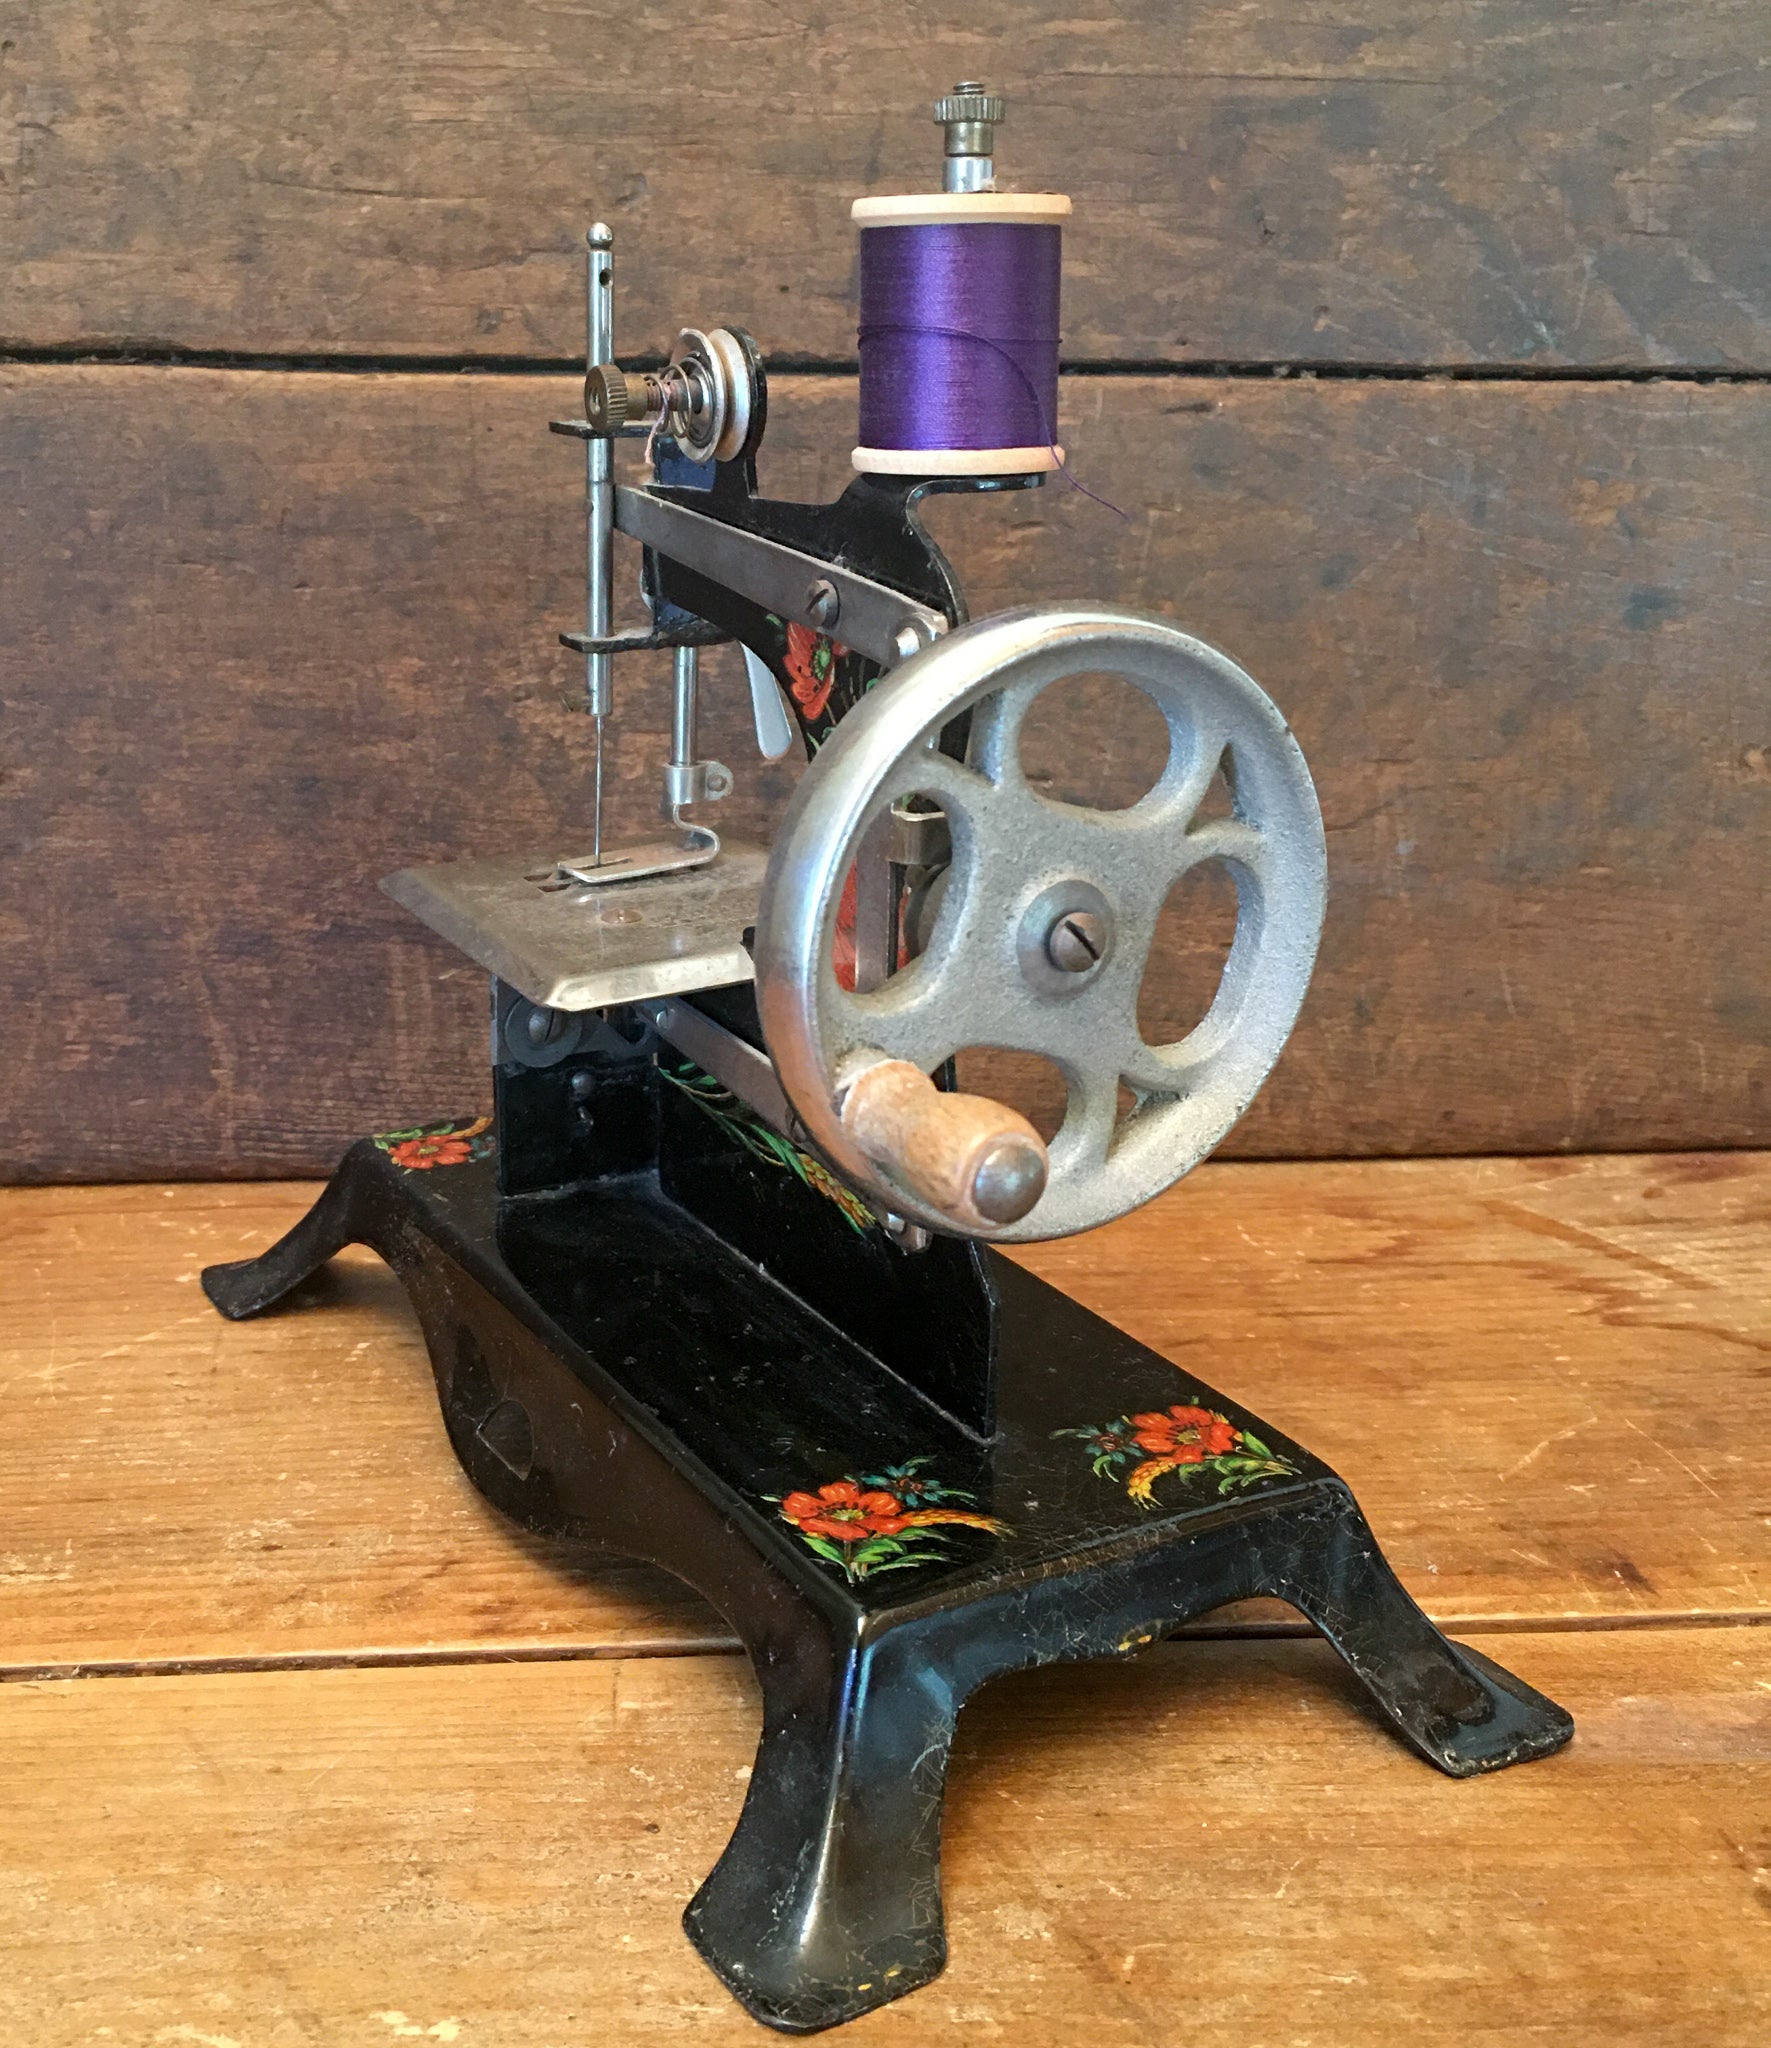 1945-1949 Casige Toy Sewing Machine, Made in Germany (#1)